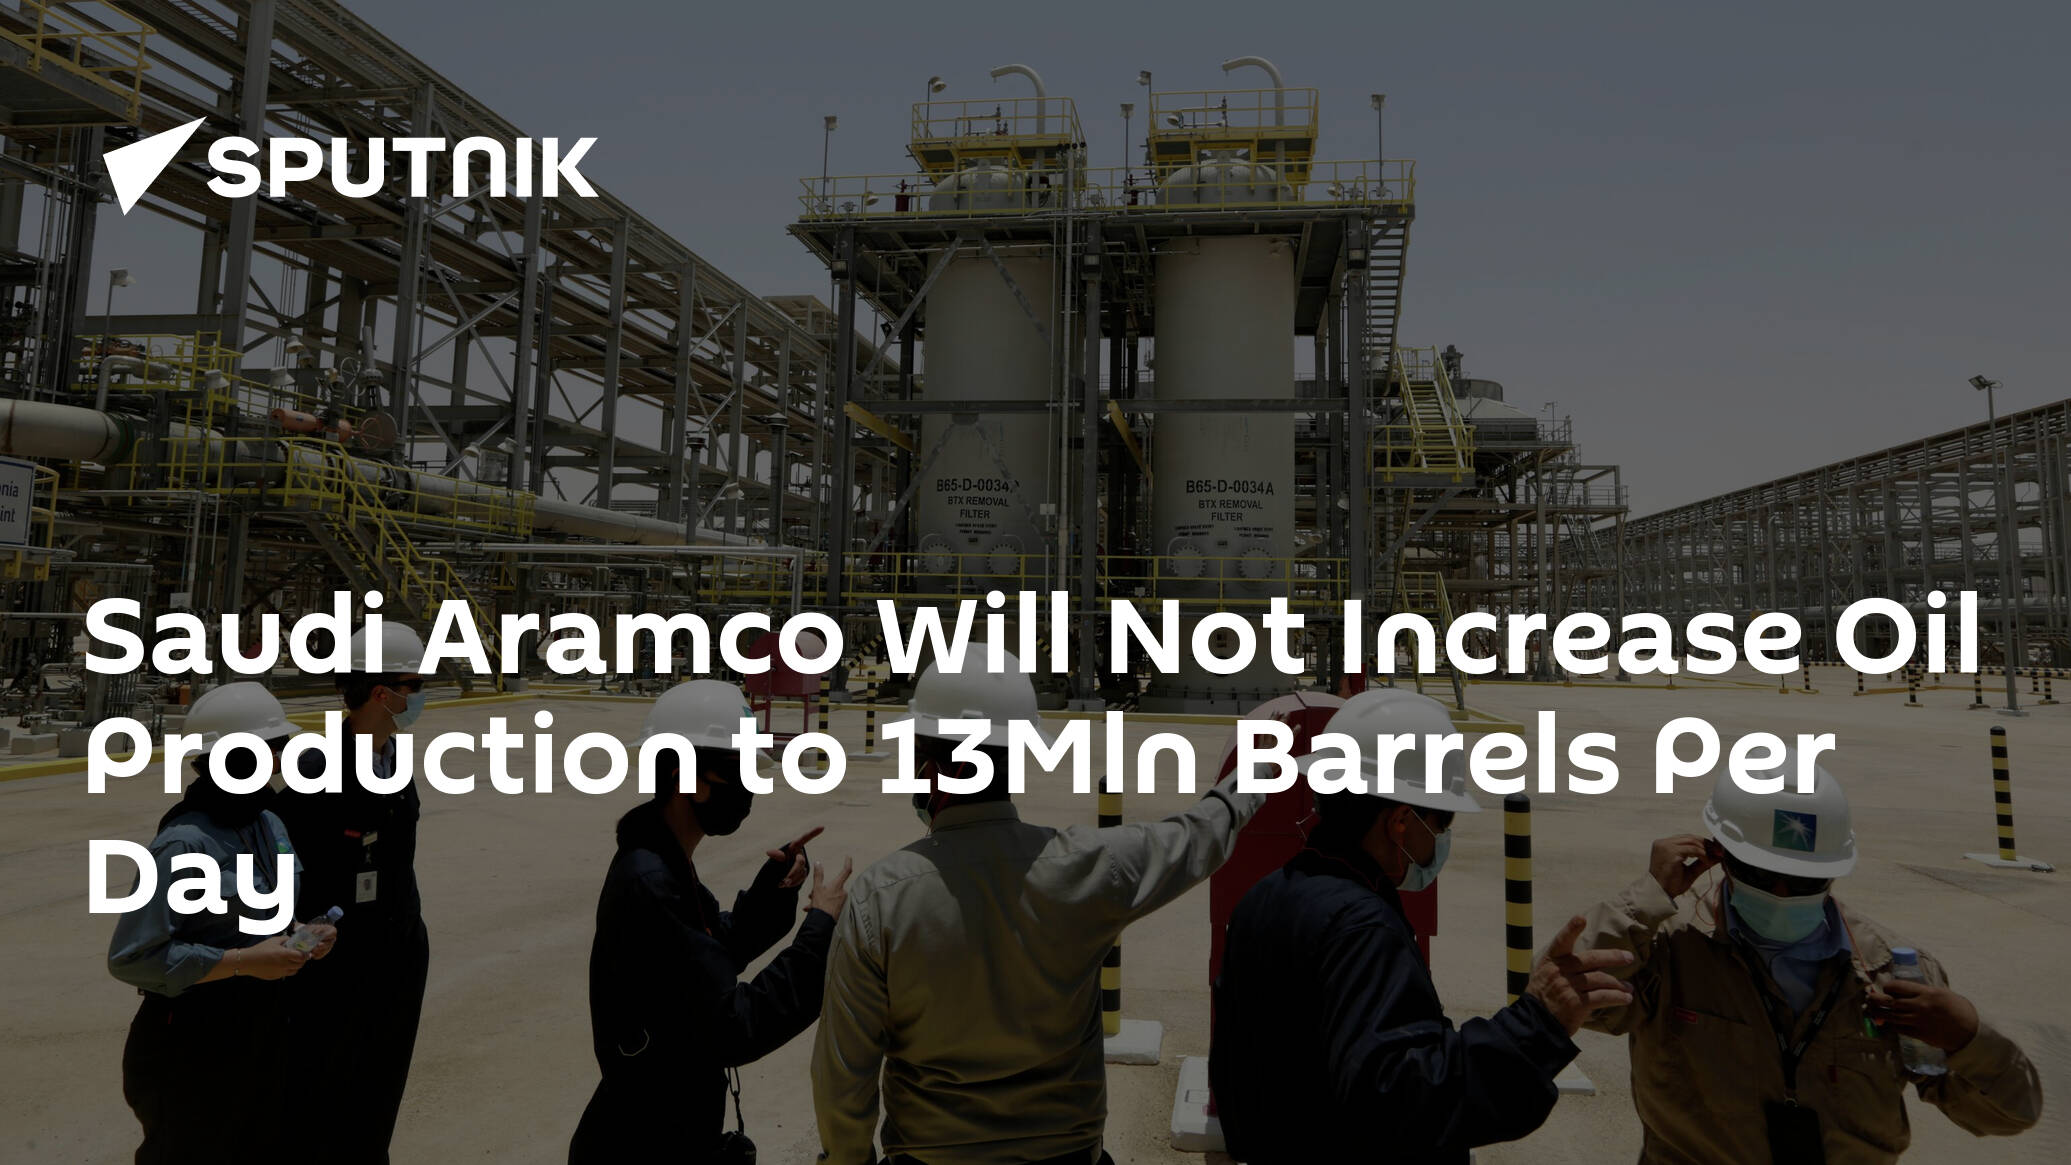 Saudi Aramco Will Not Increase Oil Production to 13Mln Barrels Per Day